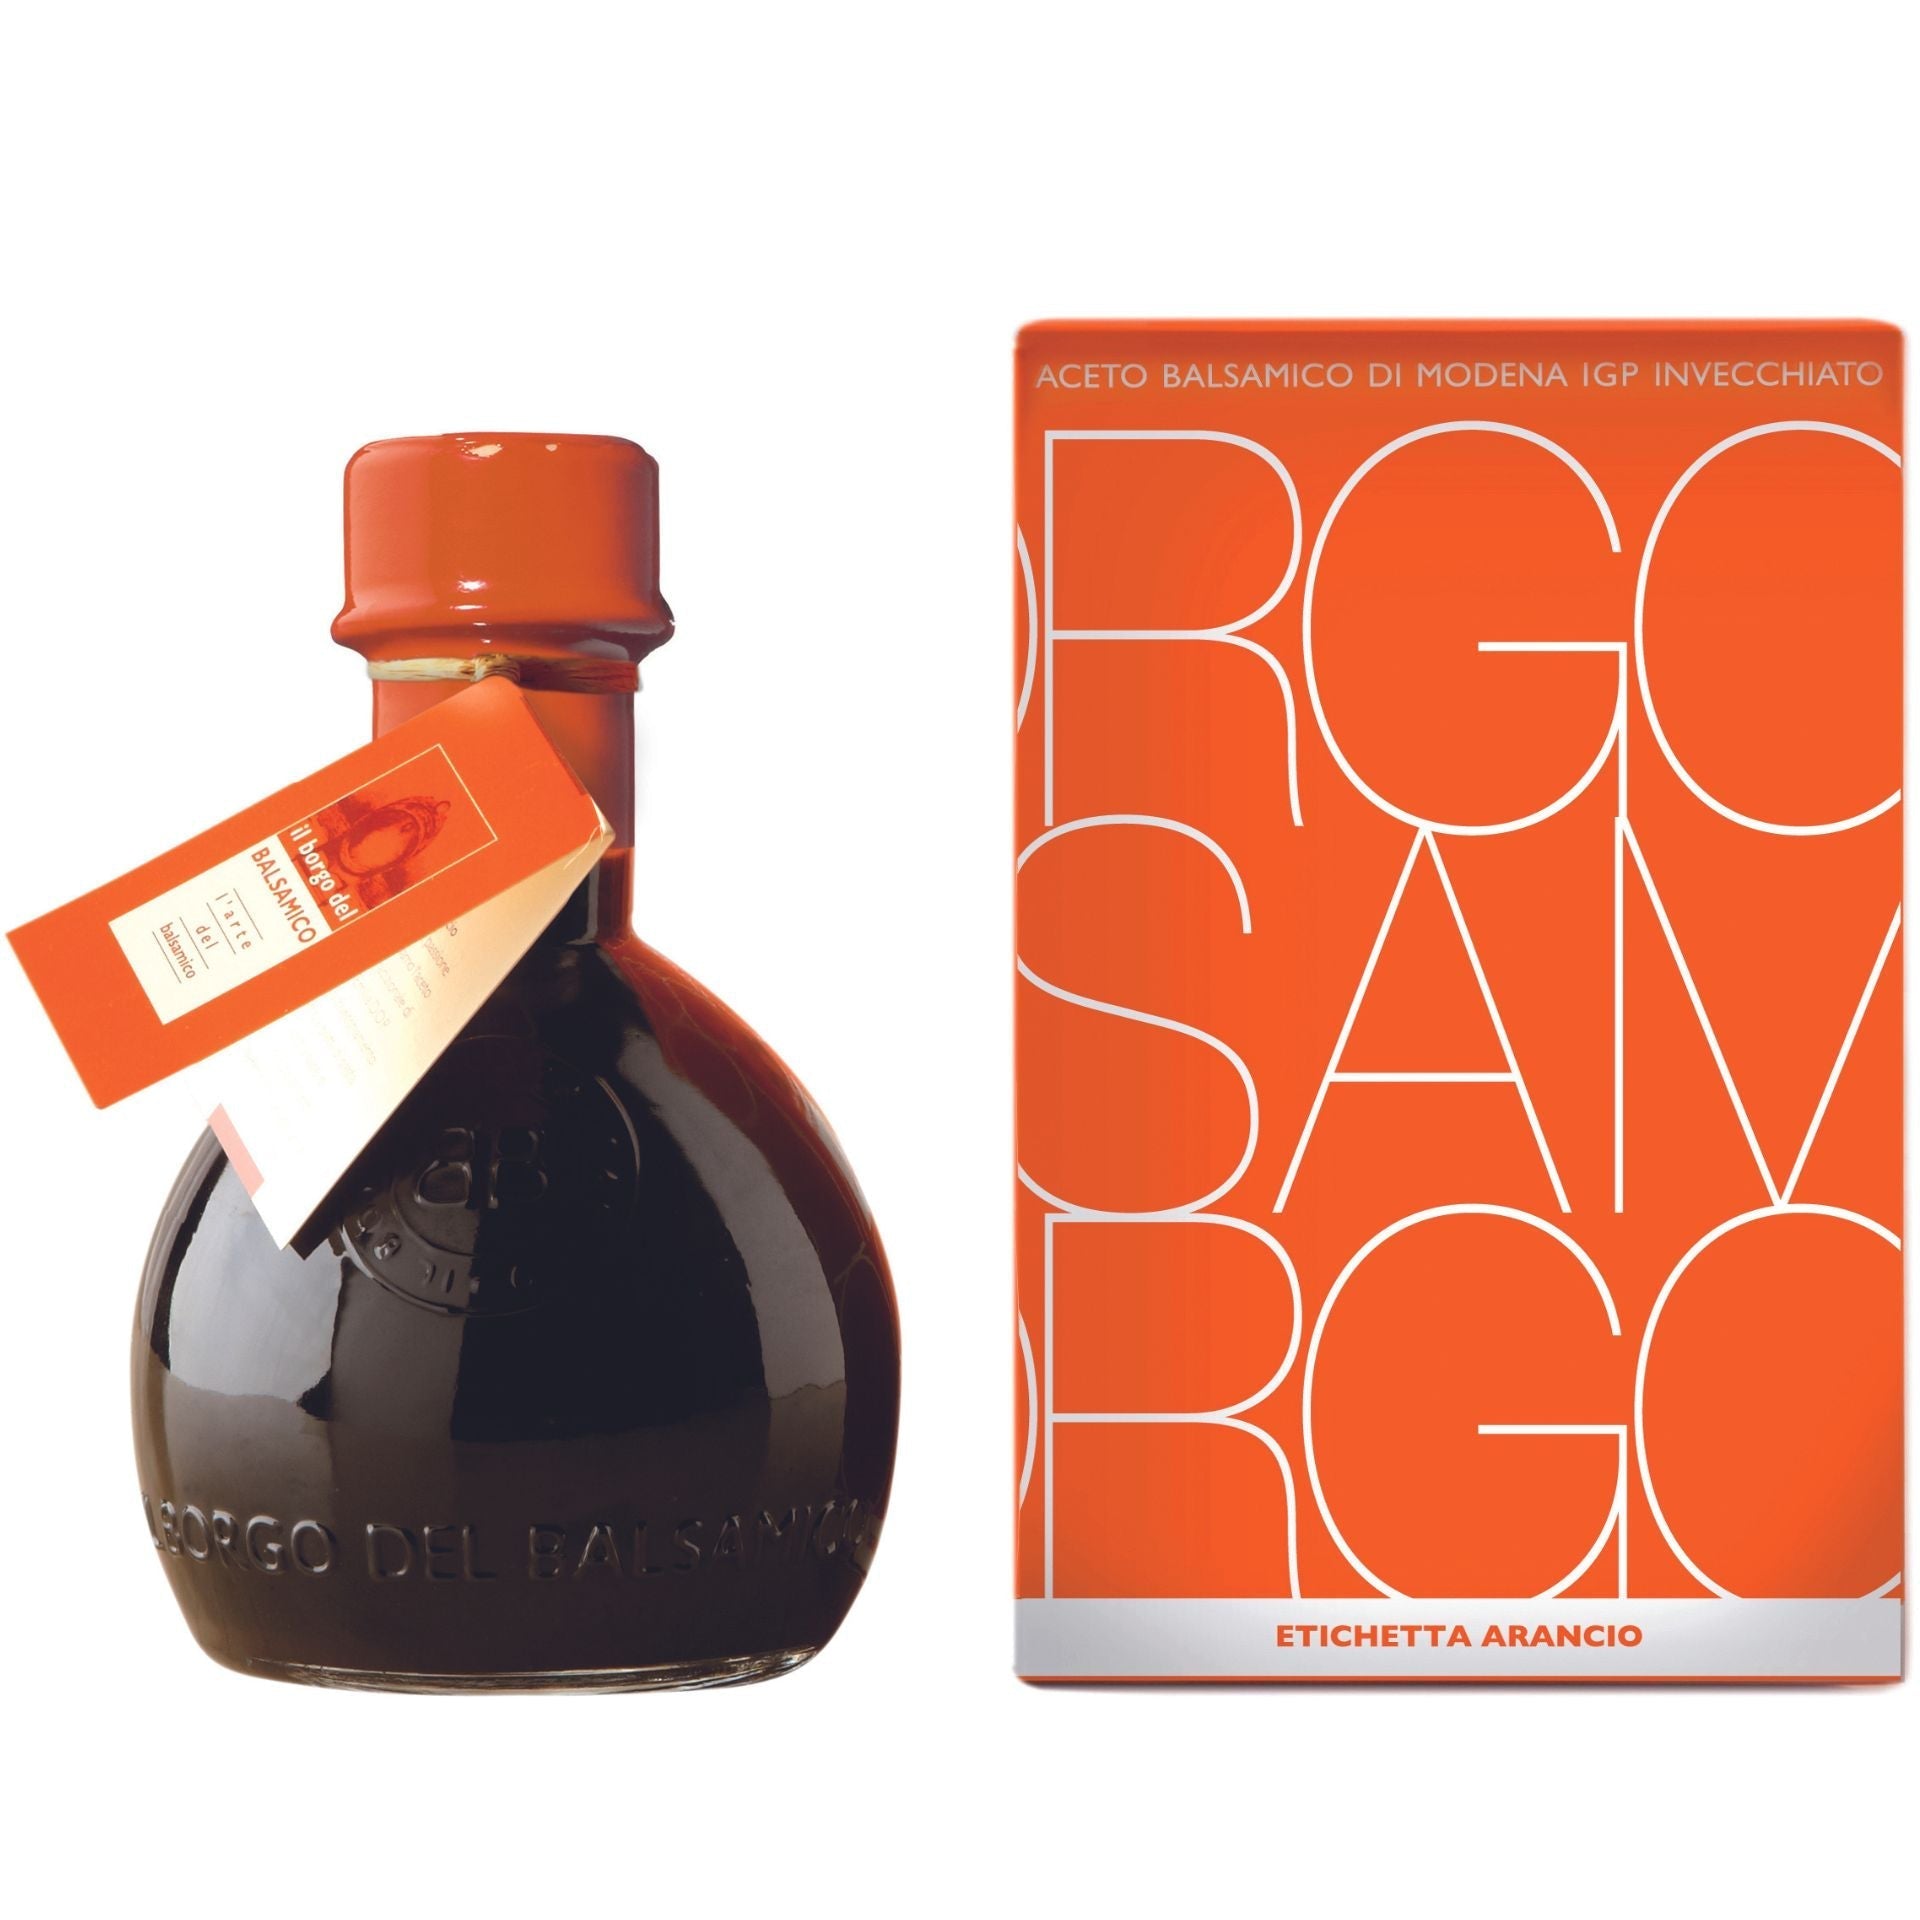 Il Borgo del Balsamico Balsamic Vinegar of Modena IGP Aged Orange Label Medium Acidity (Ampoule bottle with box) 250ml  | Imported and distributed in the UK by Just Gourmet Foods